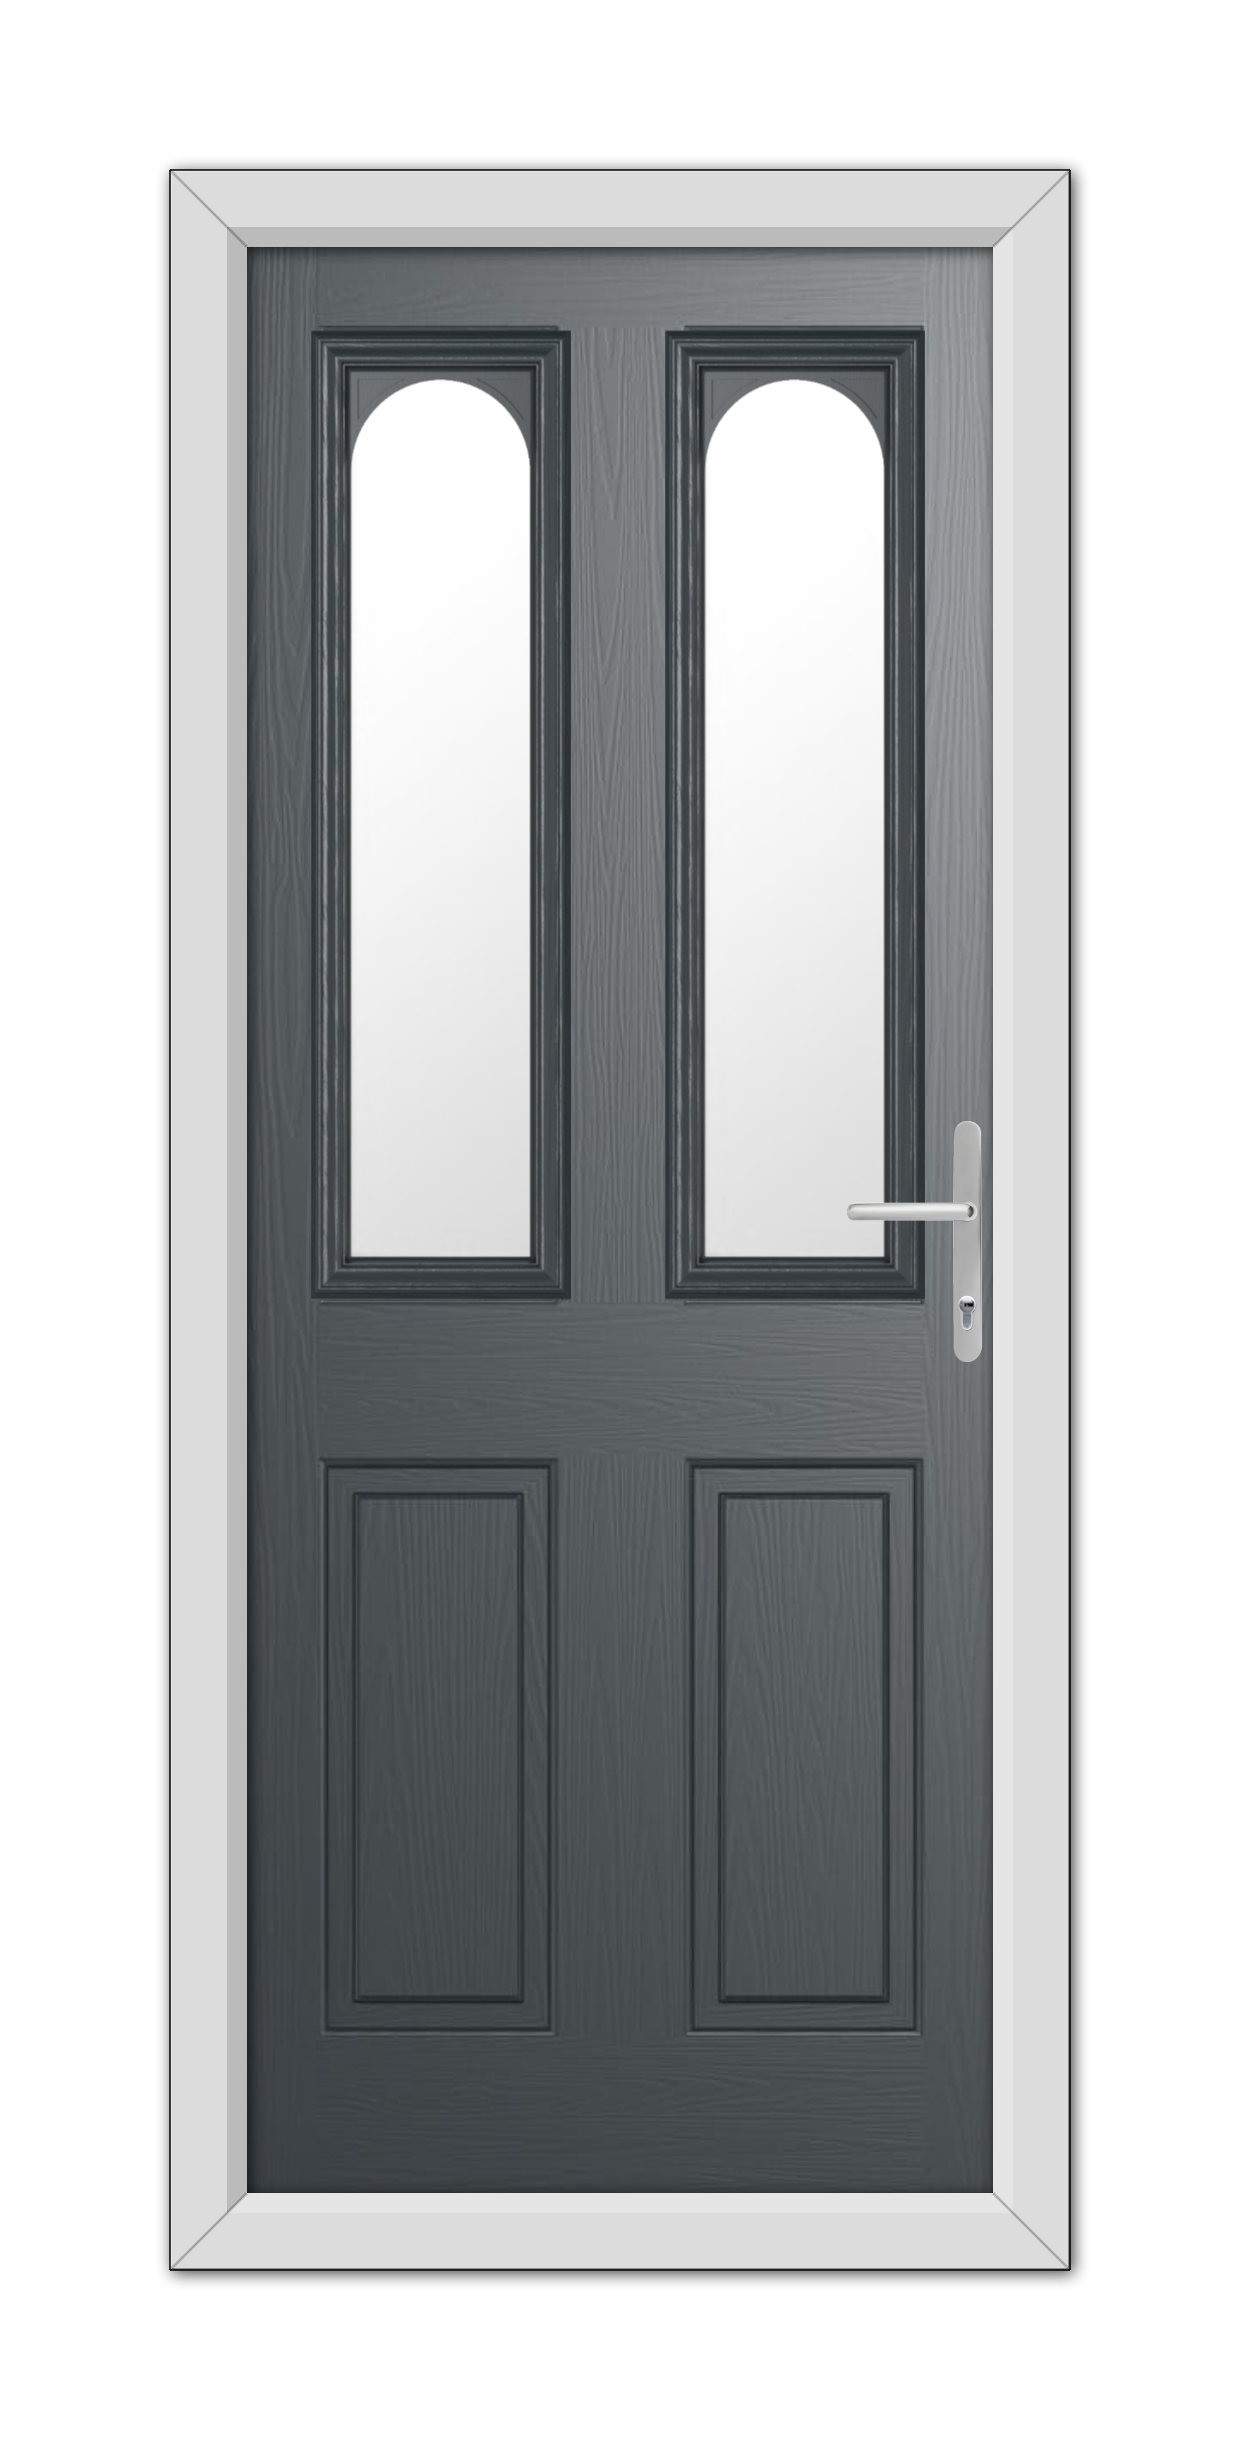 Double-door entry with a Anthracite Grey Elmhurst Composite Door 48mm Timber Core finish and vertical glass panels on each door, equipped with a modern handle on the right side.